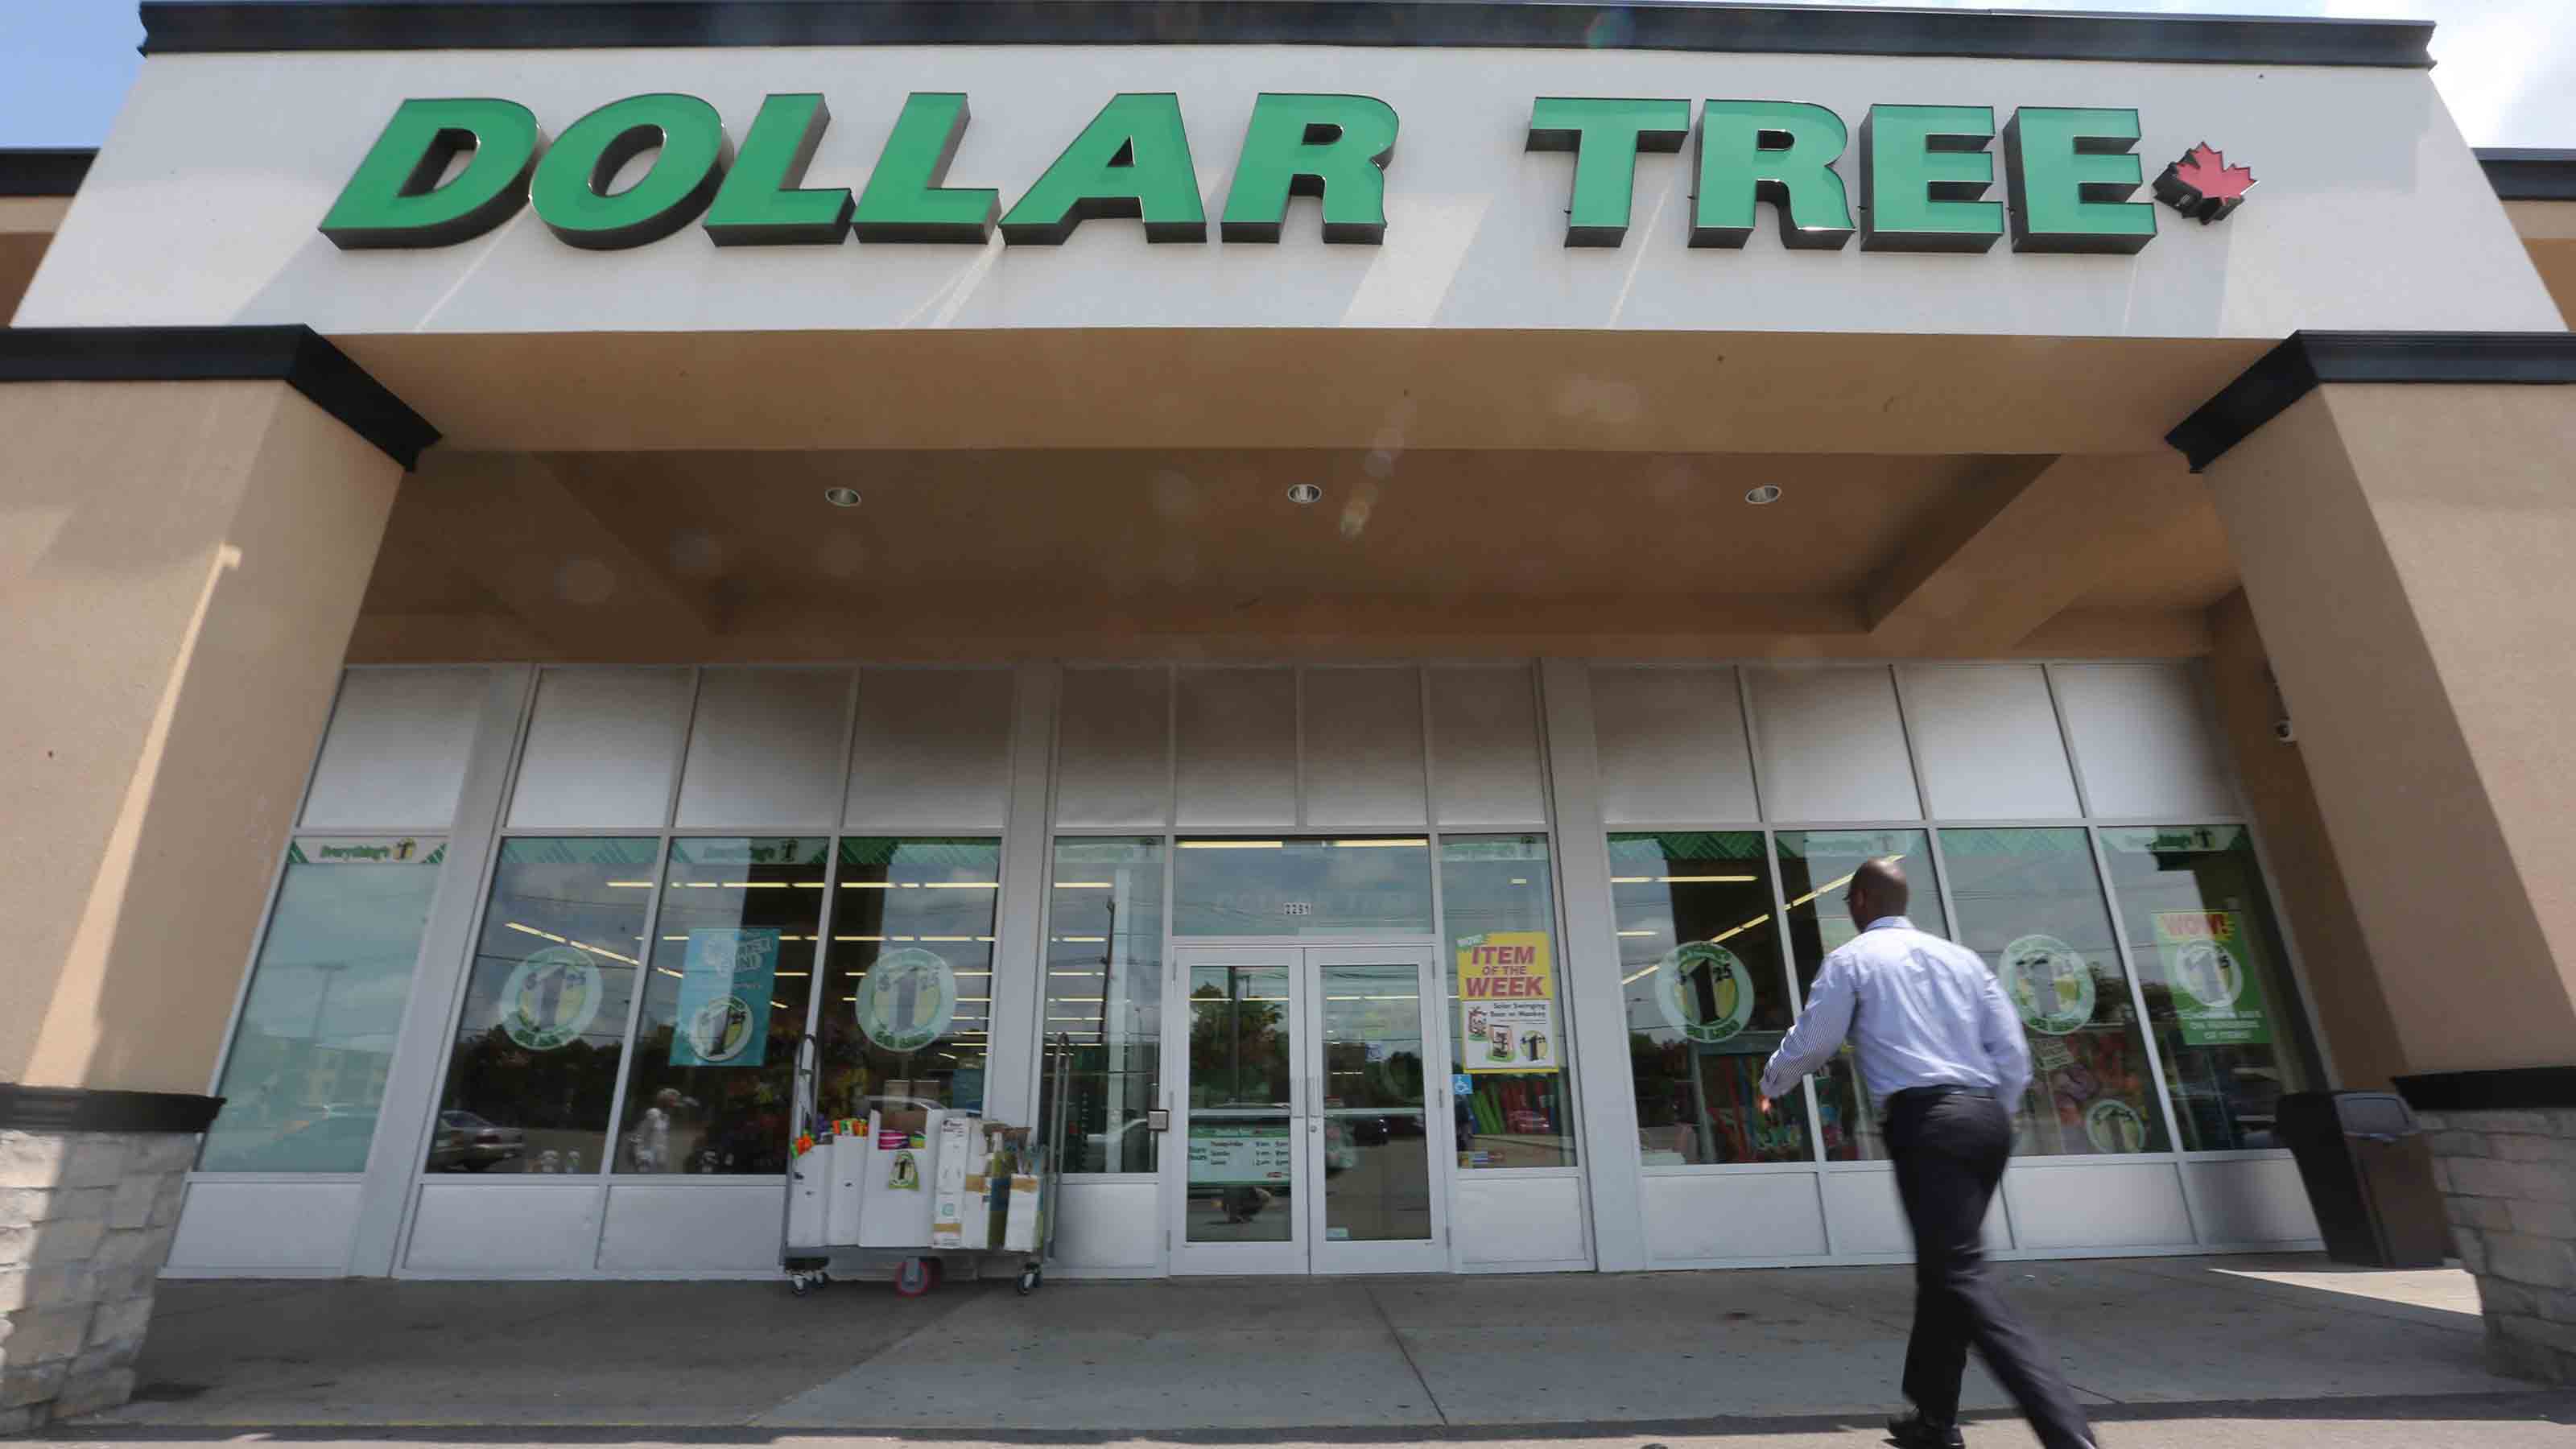 Always Buy These 11 Grocery Items at Dollar Tree